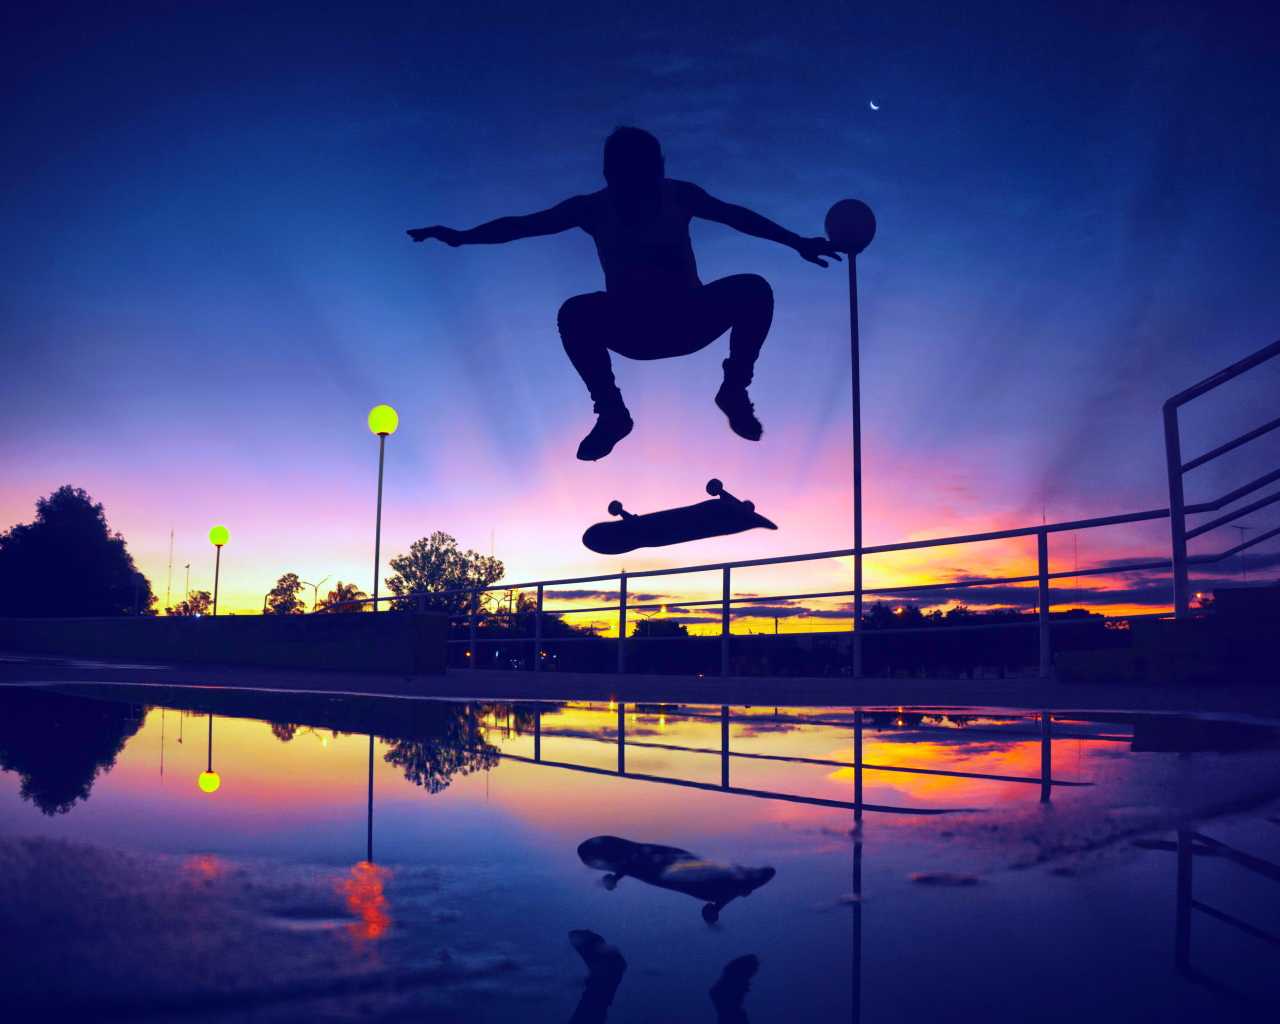 The guy jumps on a skateboard in the sunset